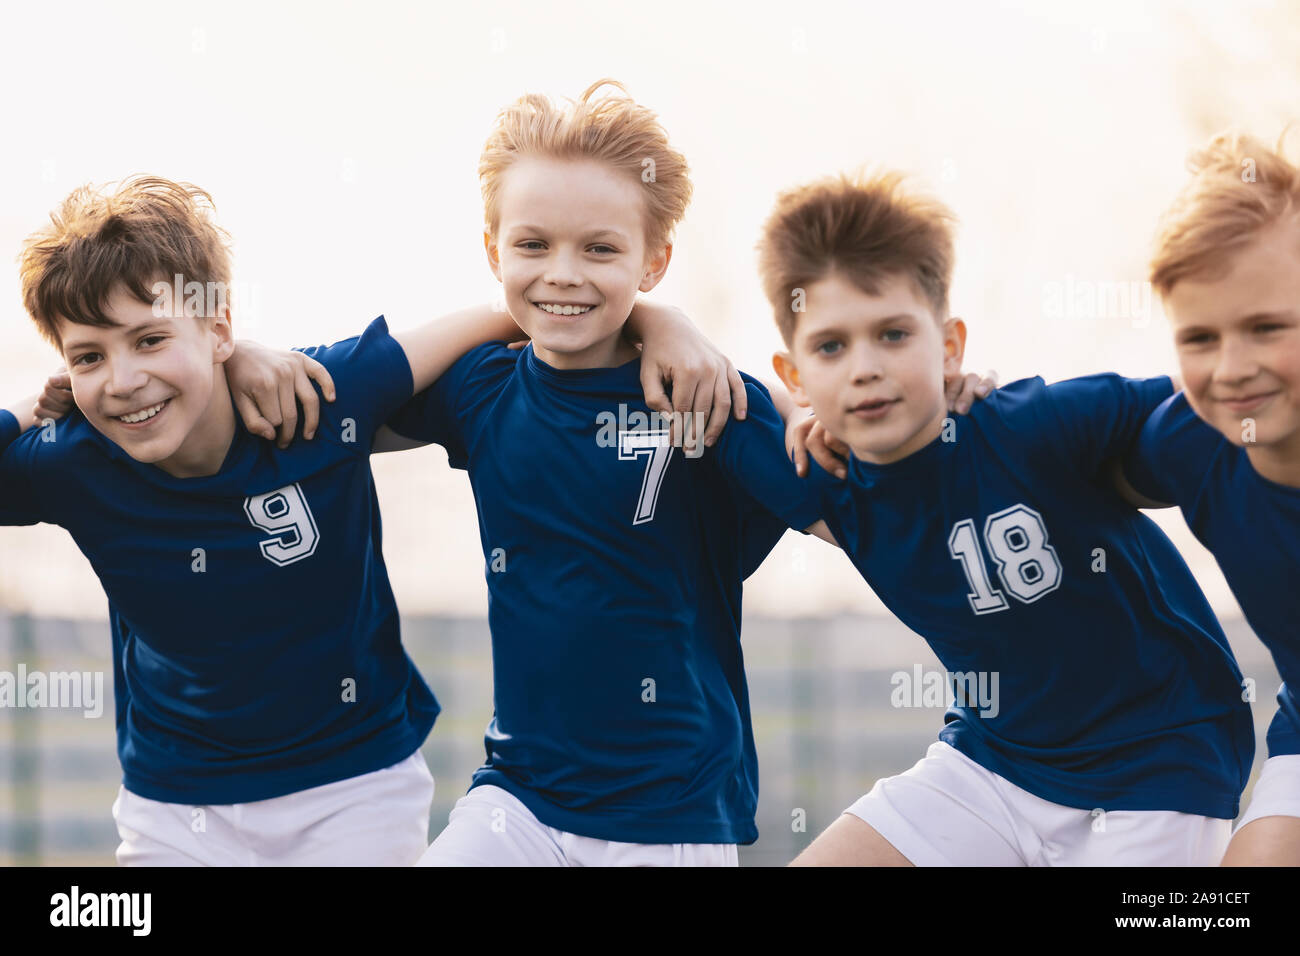 Happy Friends on a Soccer Team. Boys Sports Players Having Fun. Kids Soccer Players Cheering Together Stock Photo